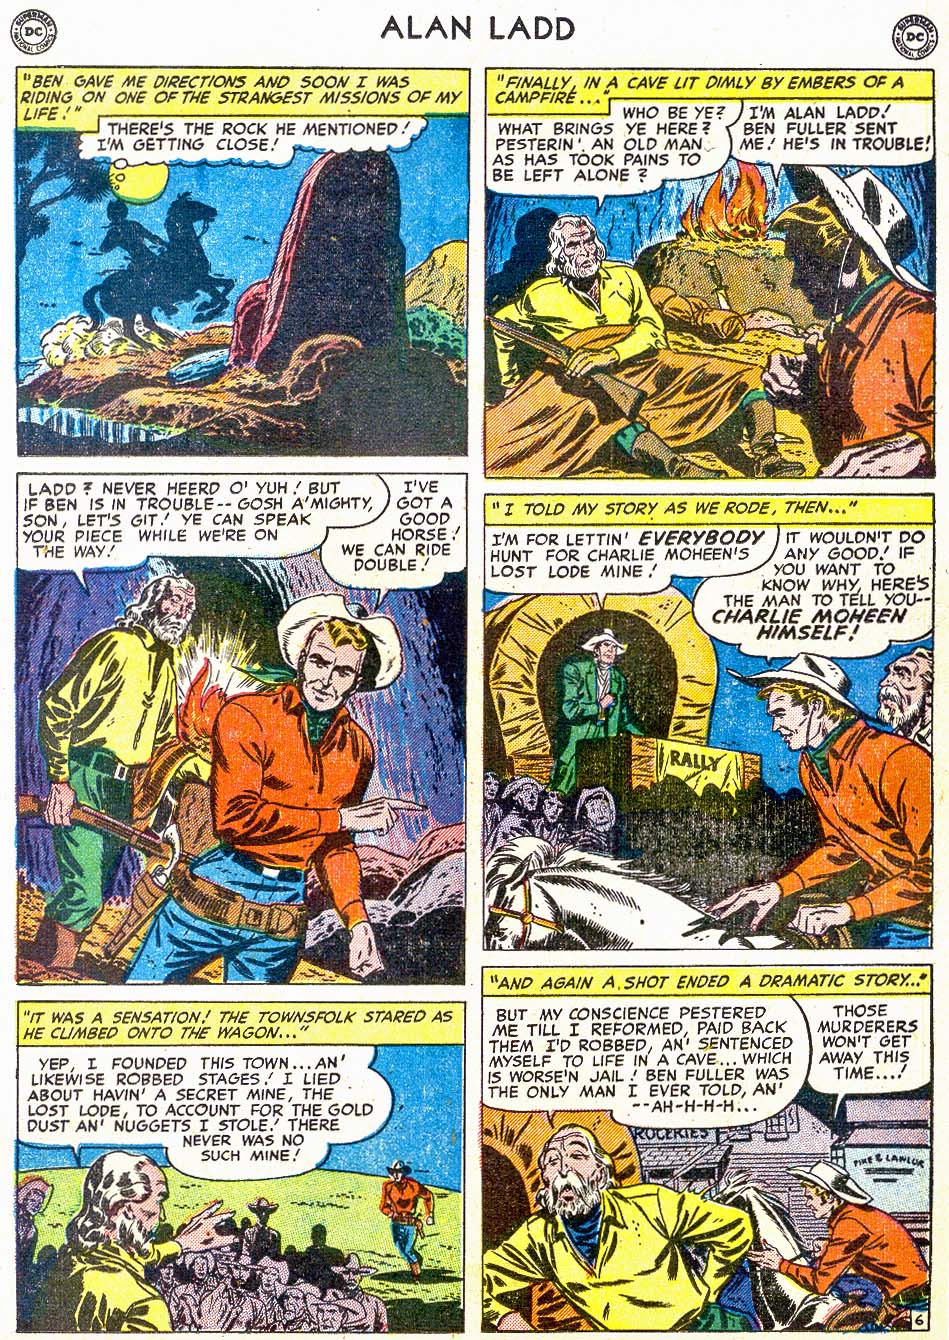 Read online Adventures of Alan Ladd comic -  Issue #6 - 26